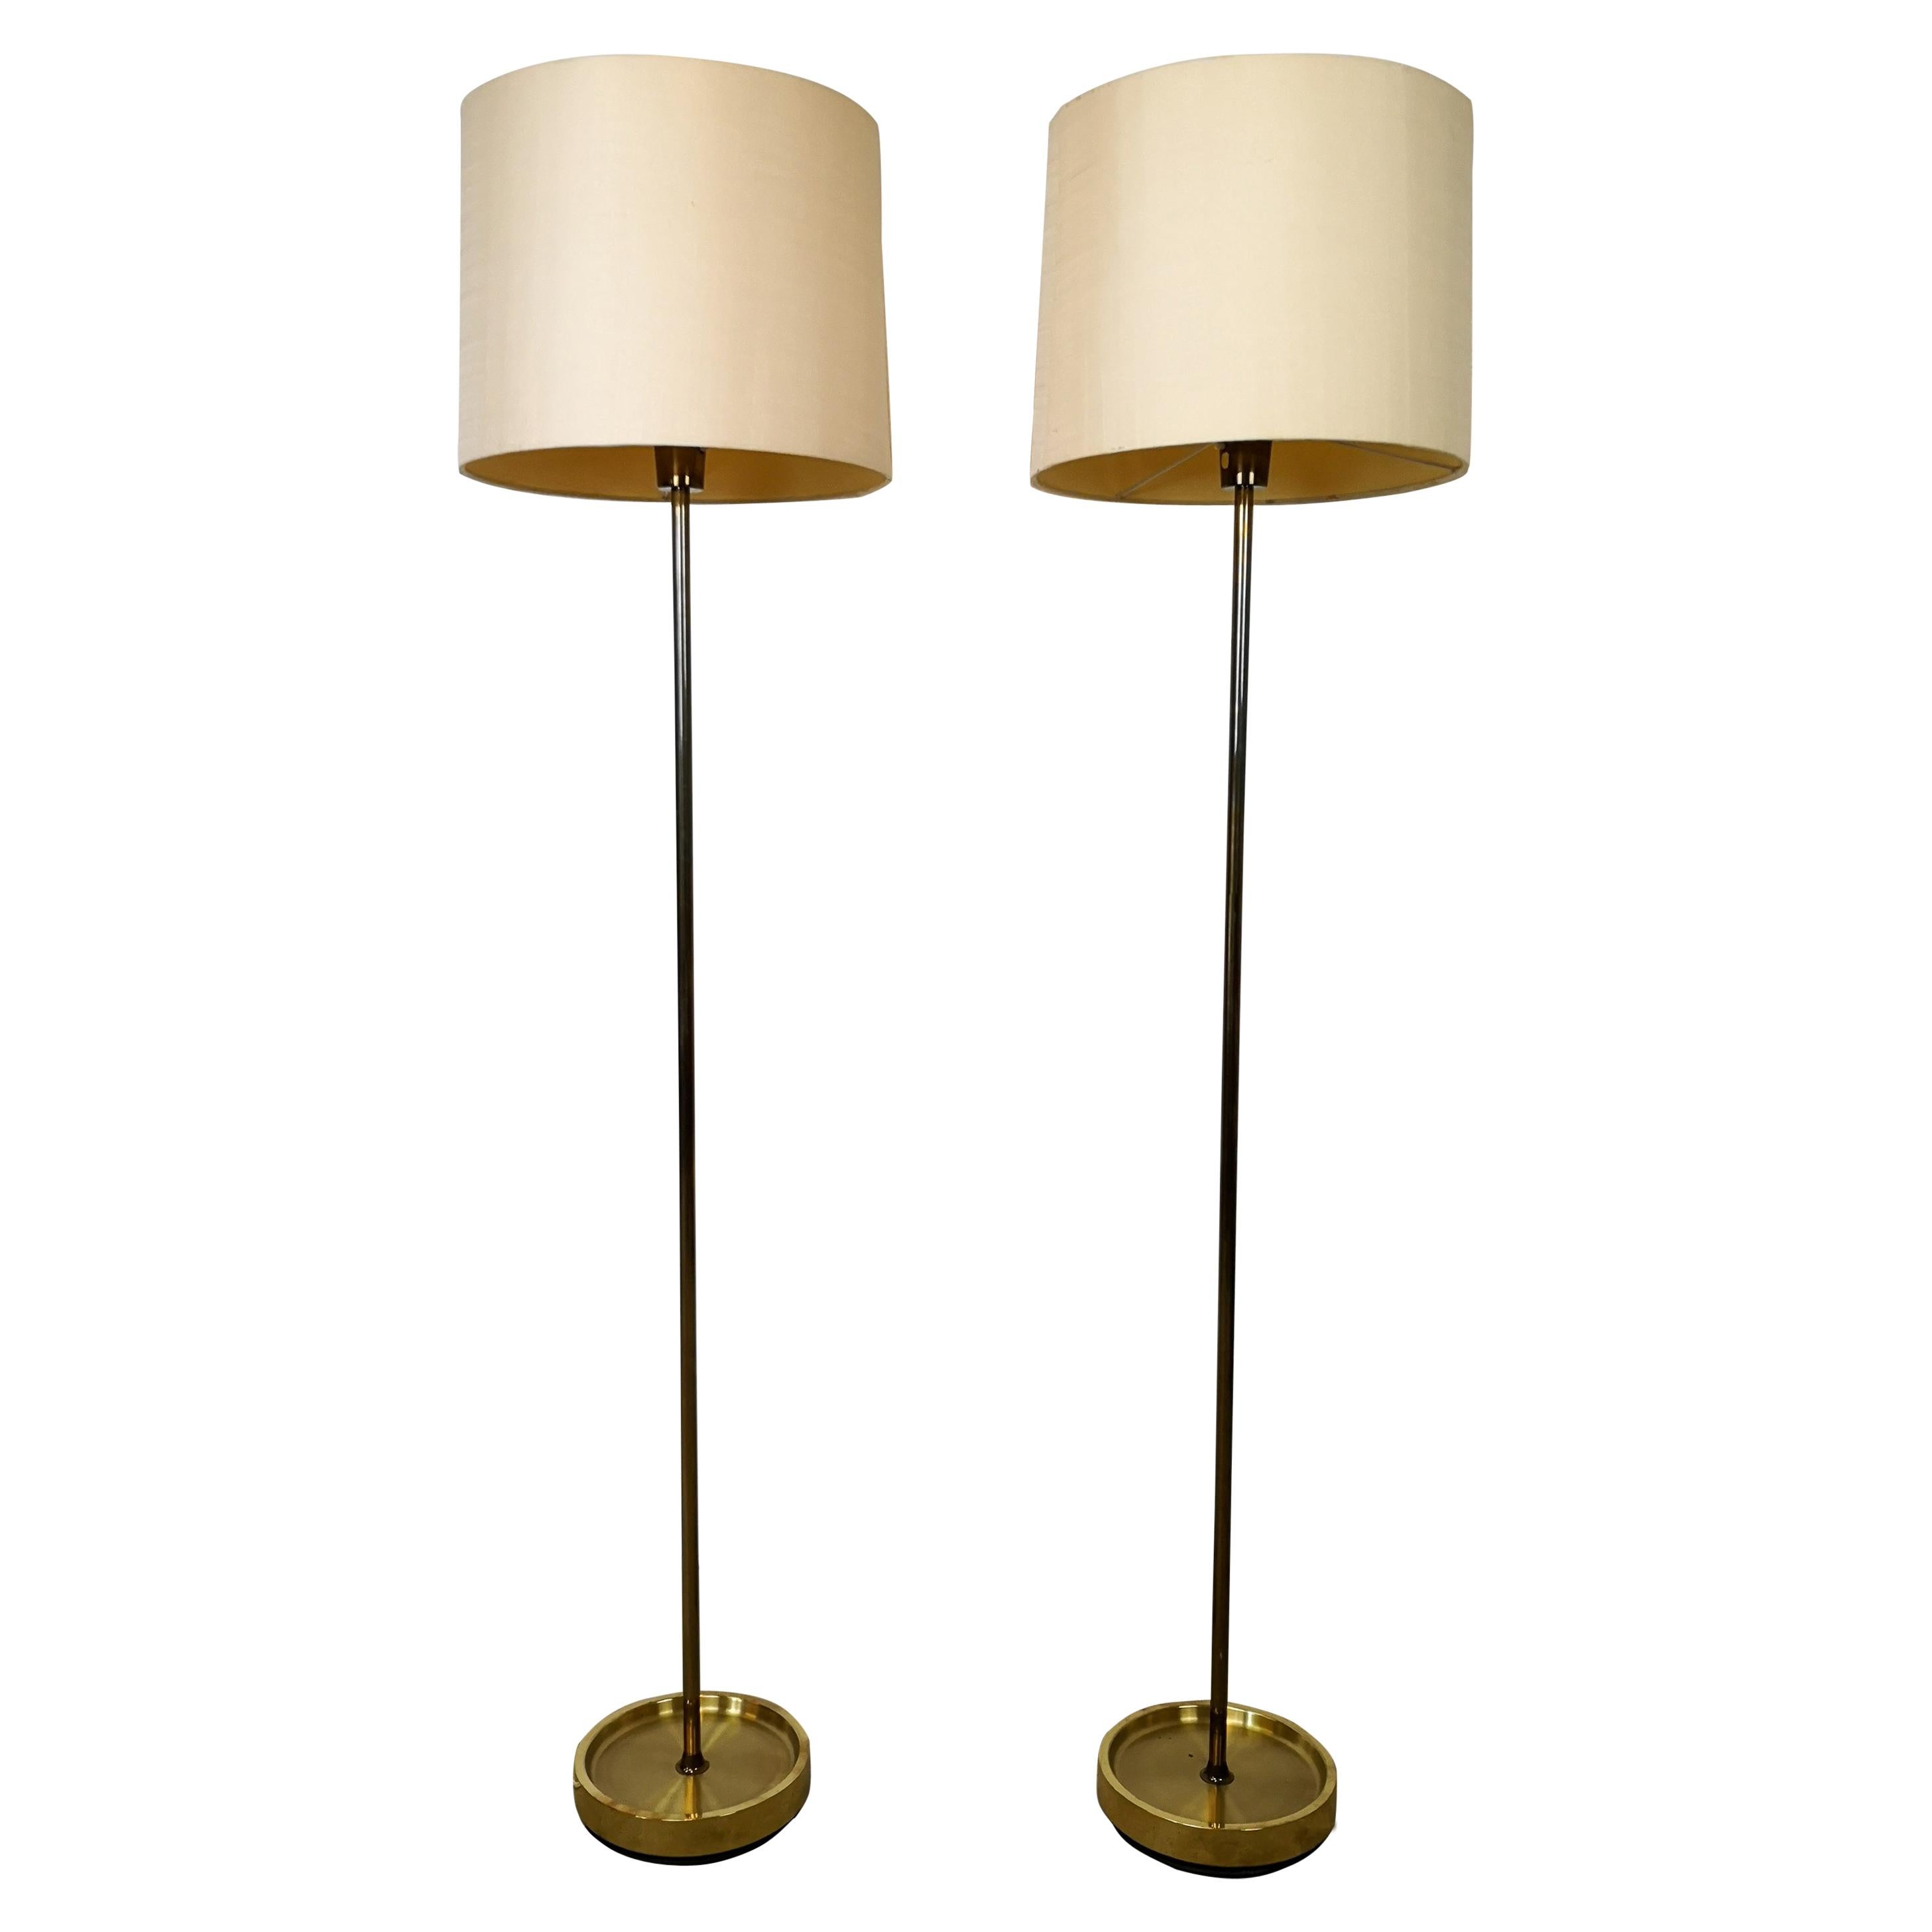 Vintage Swedish Brass Floor Lamps 1960s Fagerhults Belysning